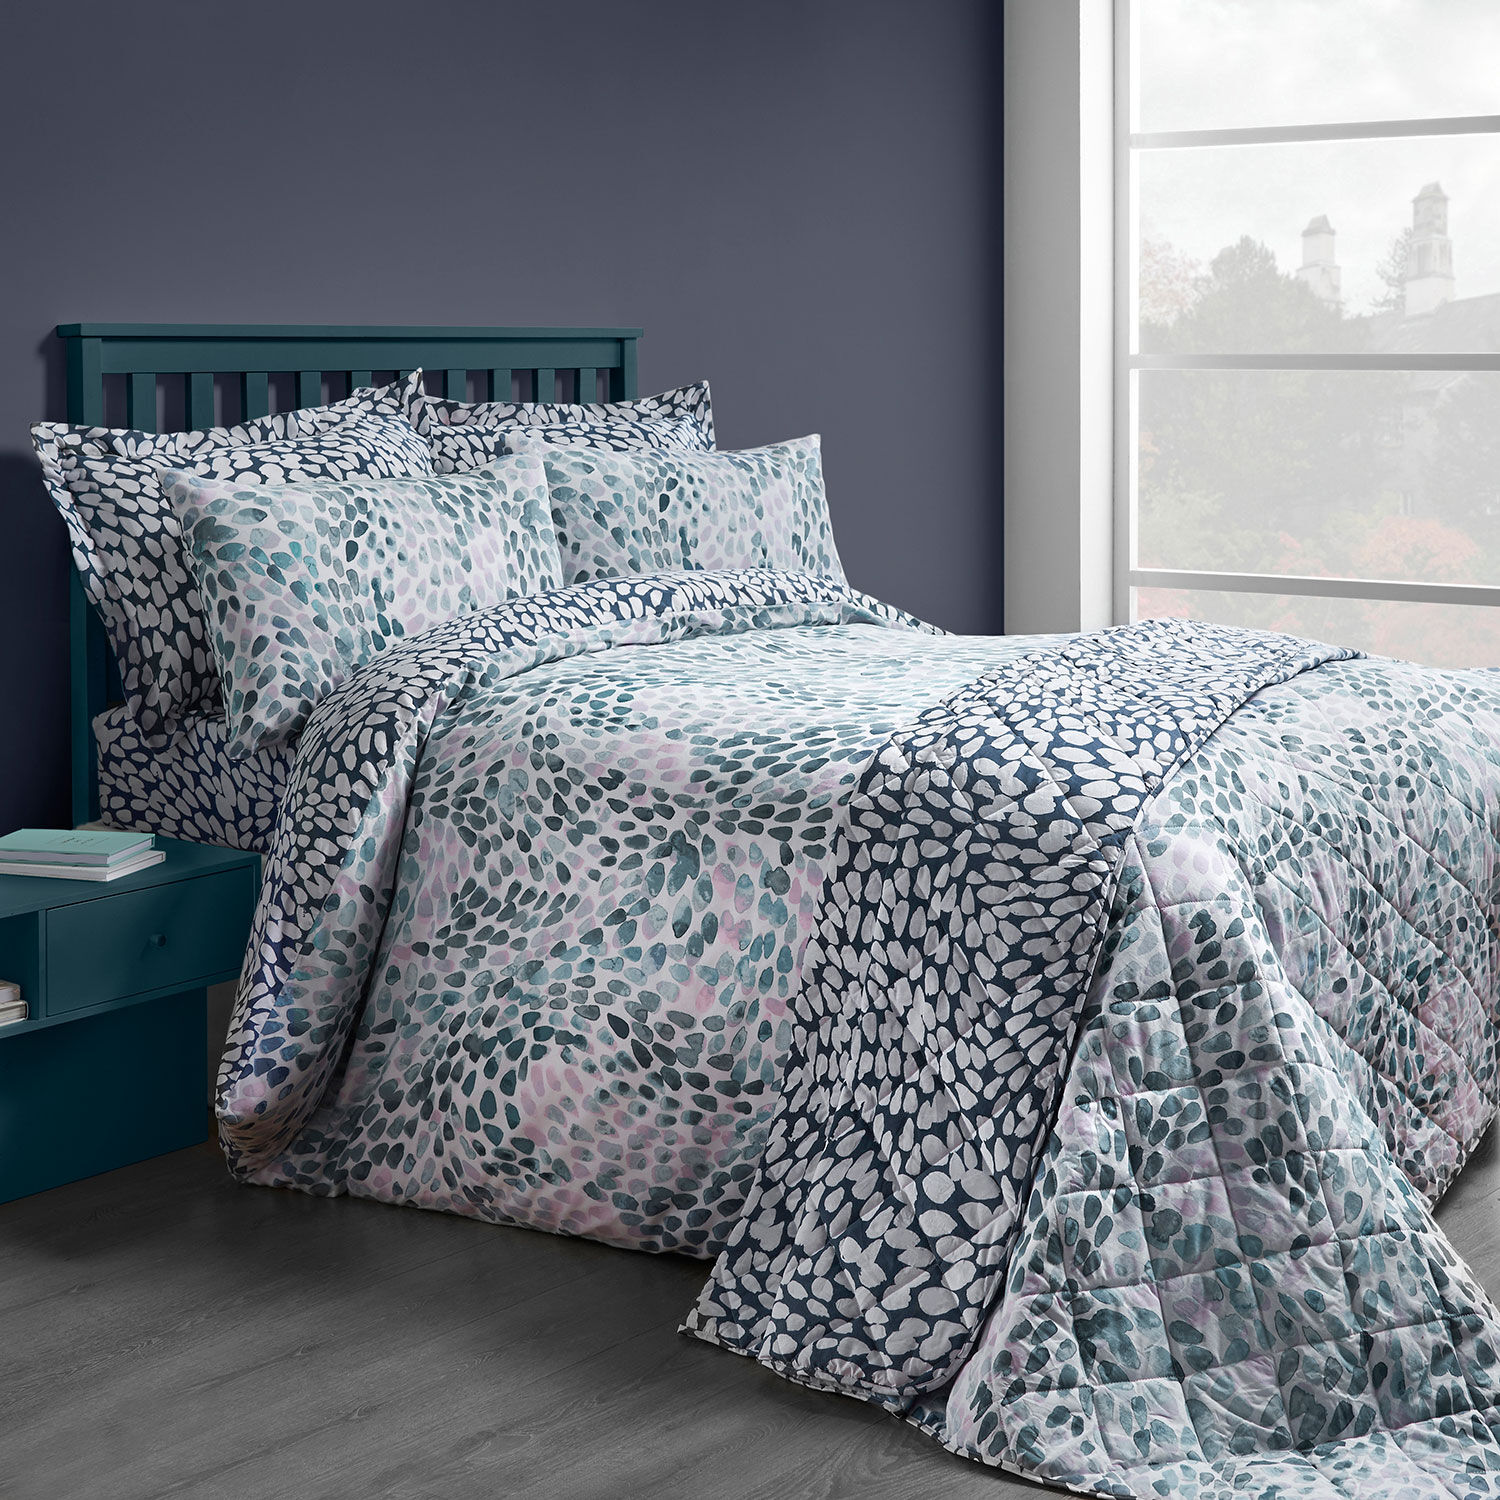 Sites Home Site, Grey And Teal Super King Bedding